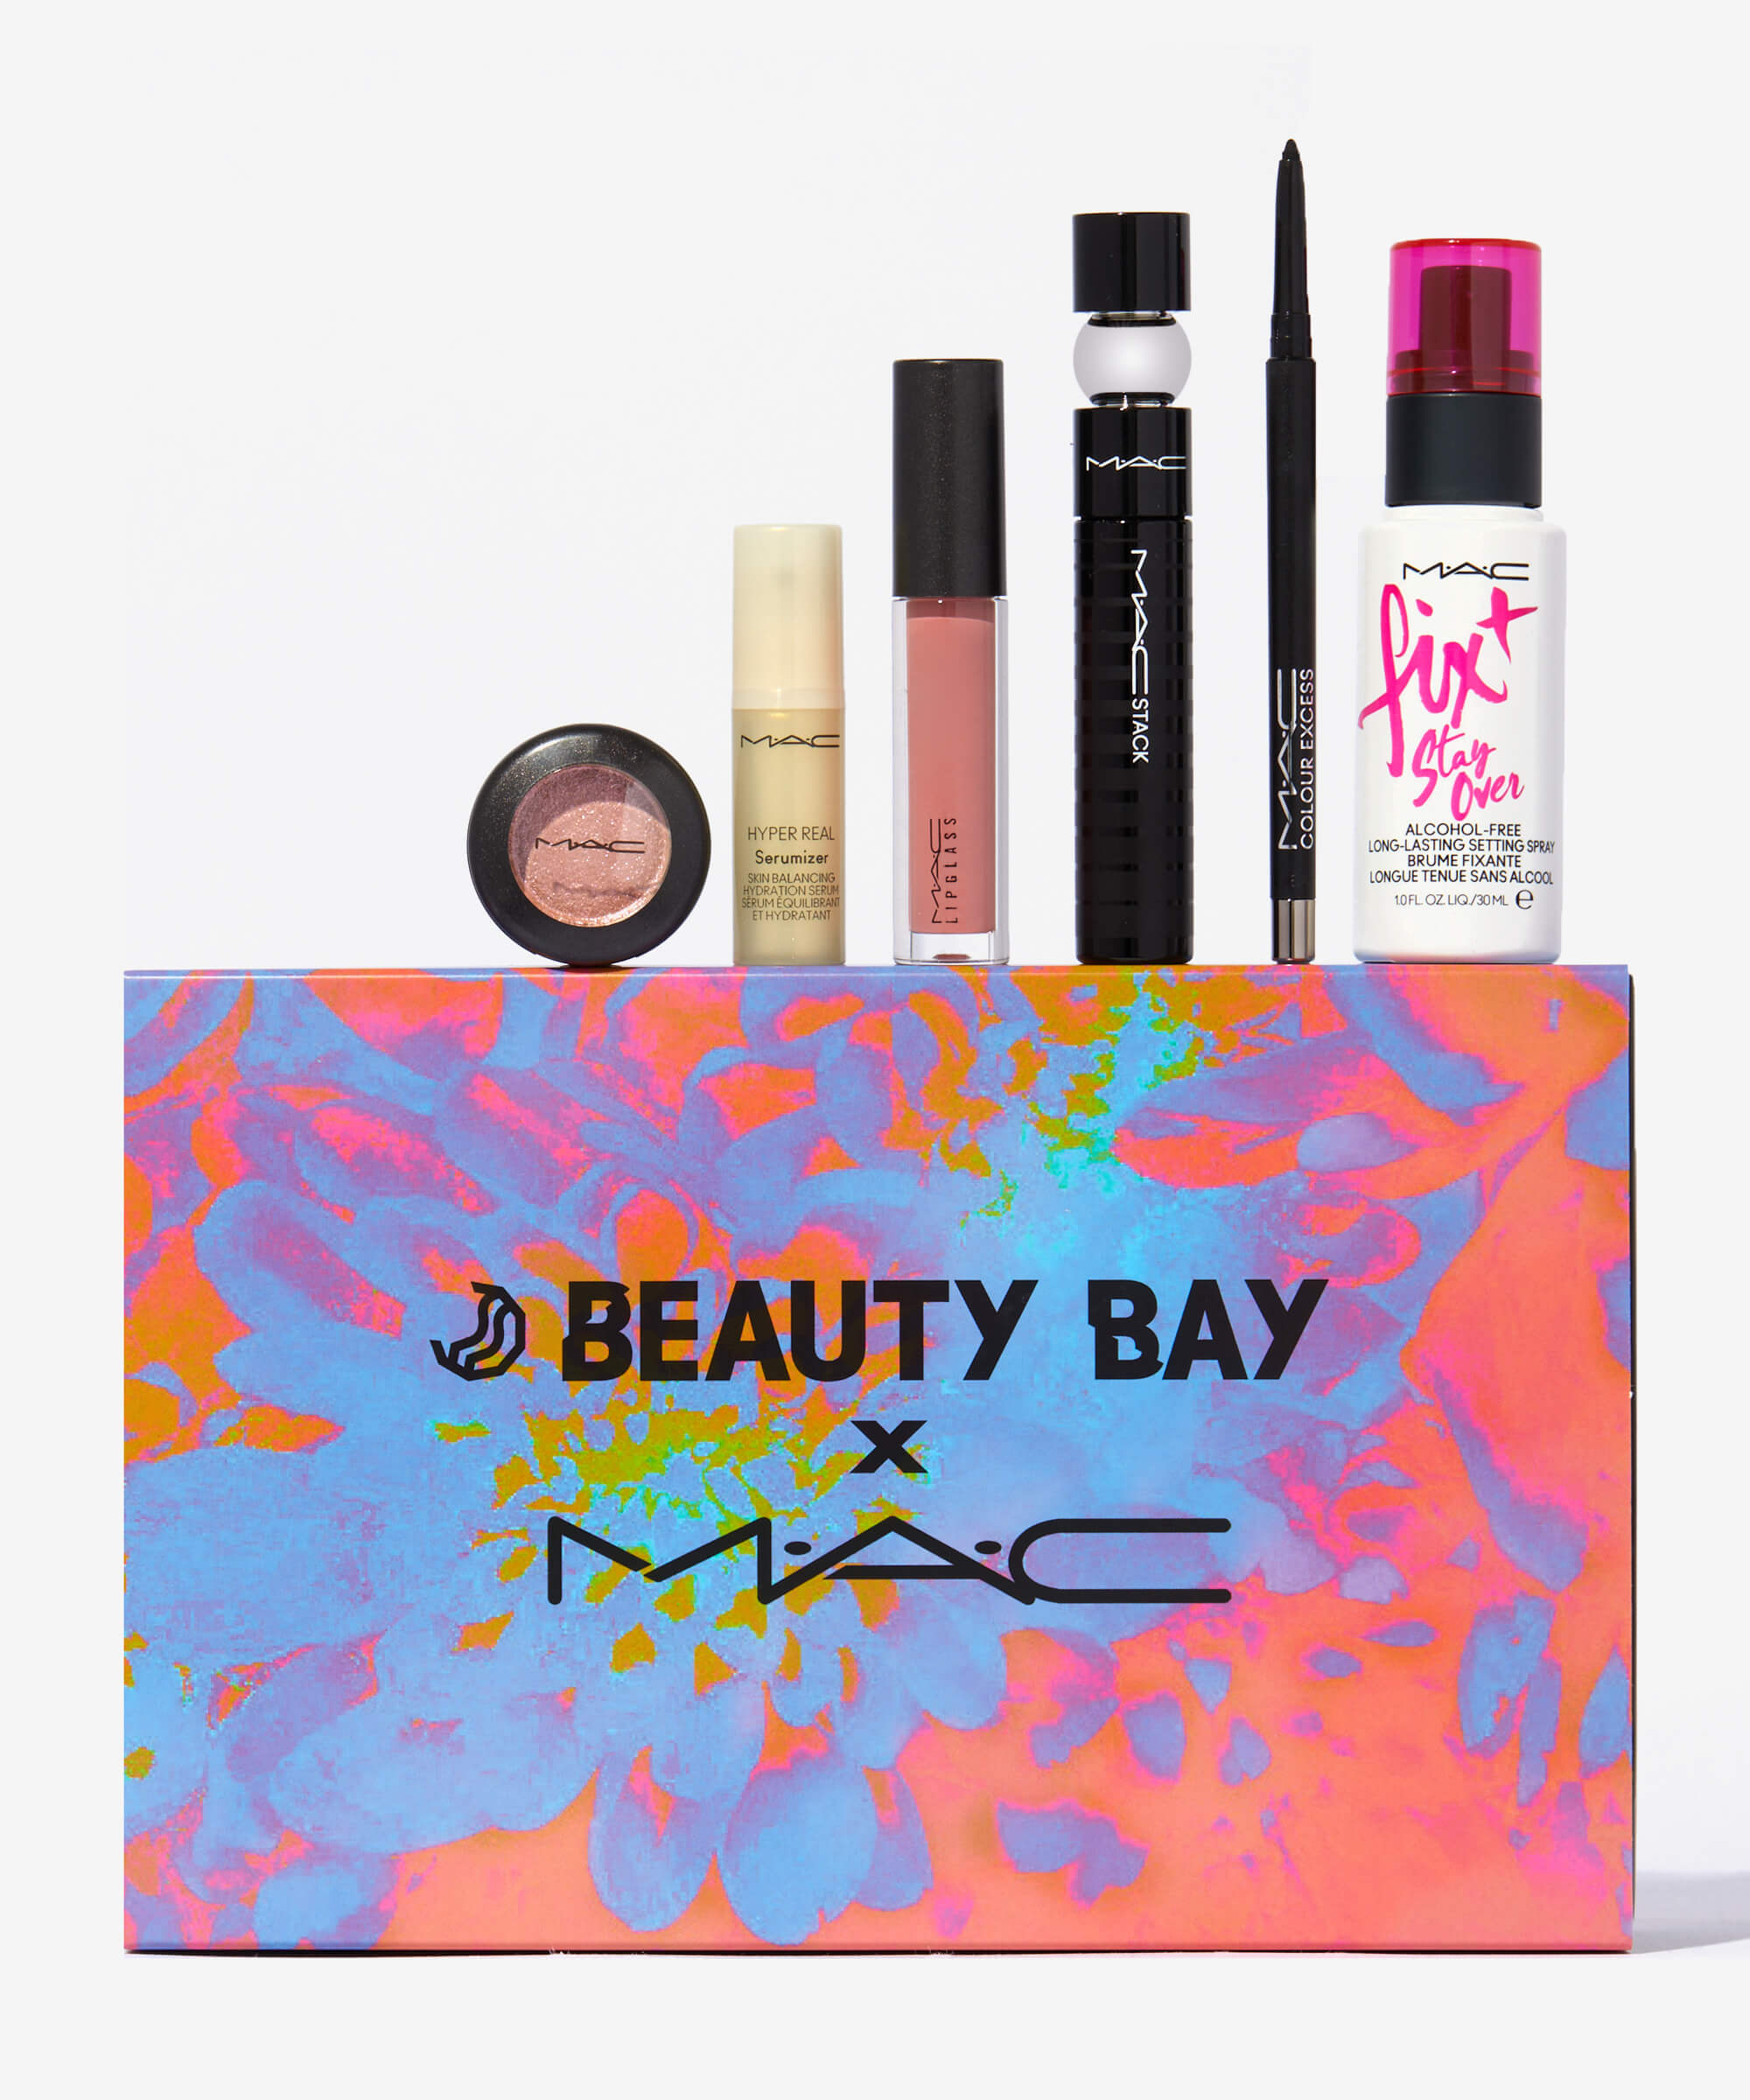 Introducing the BEAUTY BAY x M.A.C. Cosmetics Faves Box - Beauty Bay Edited